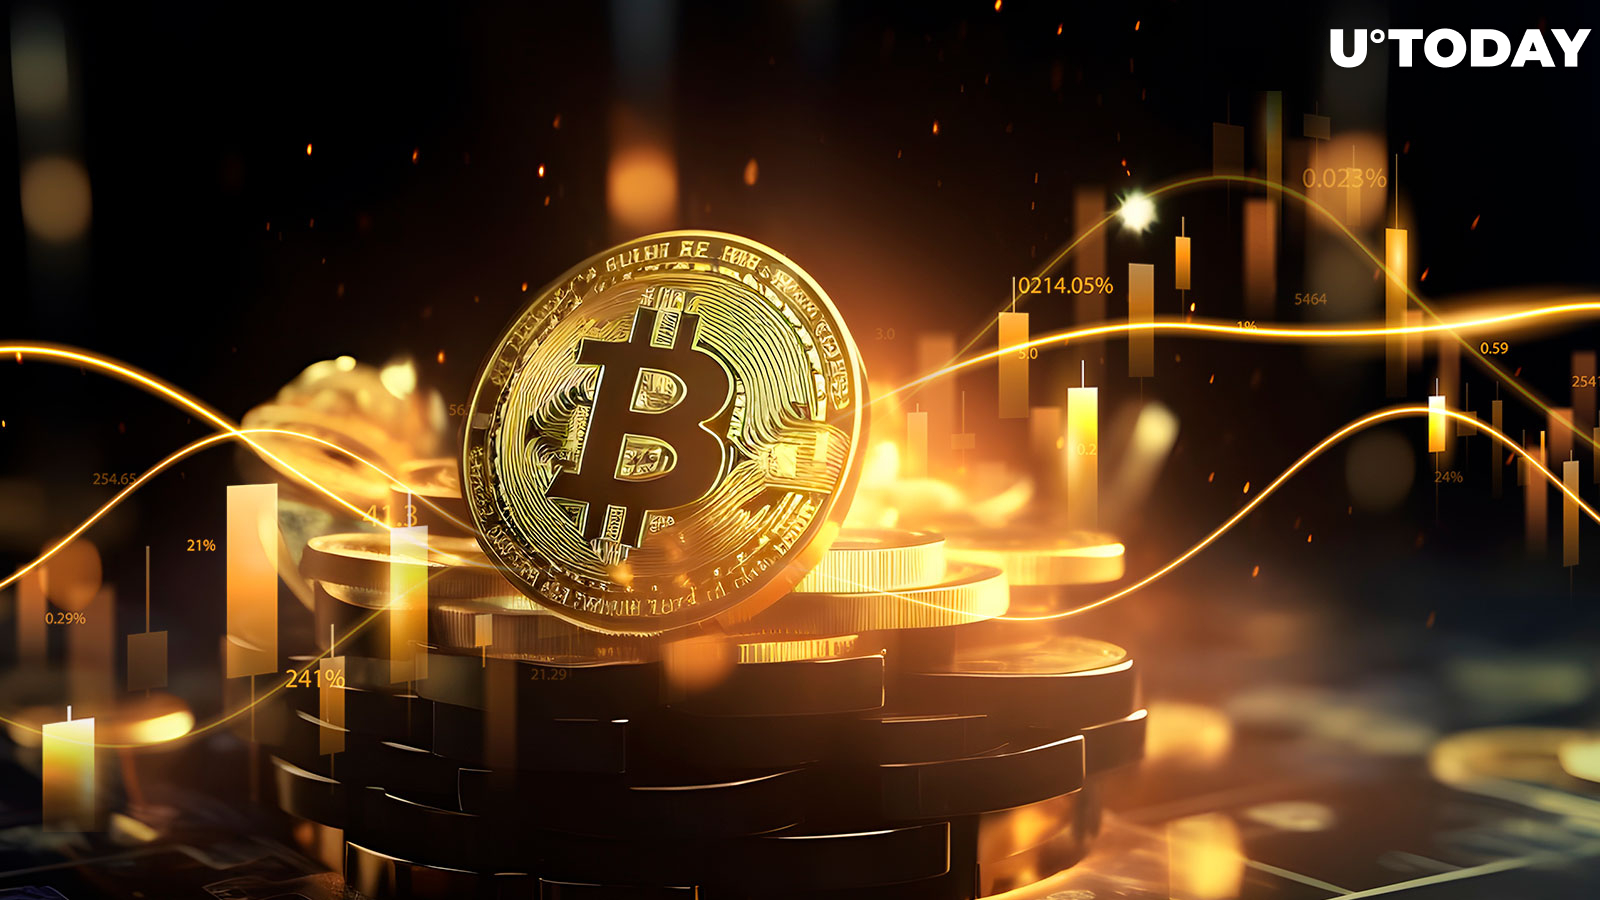 Bitcoin (BTC) Price Comes Awfully Close to $40,000, Shorts Getting Hammered